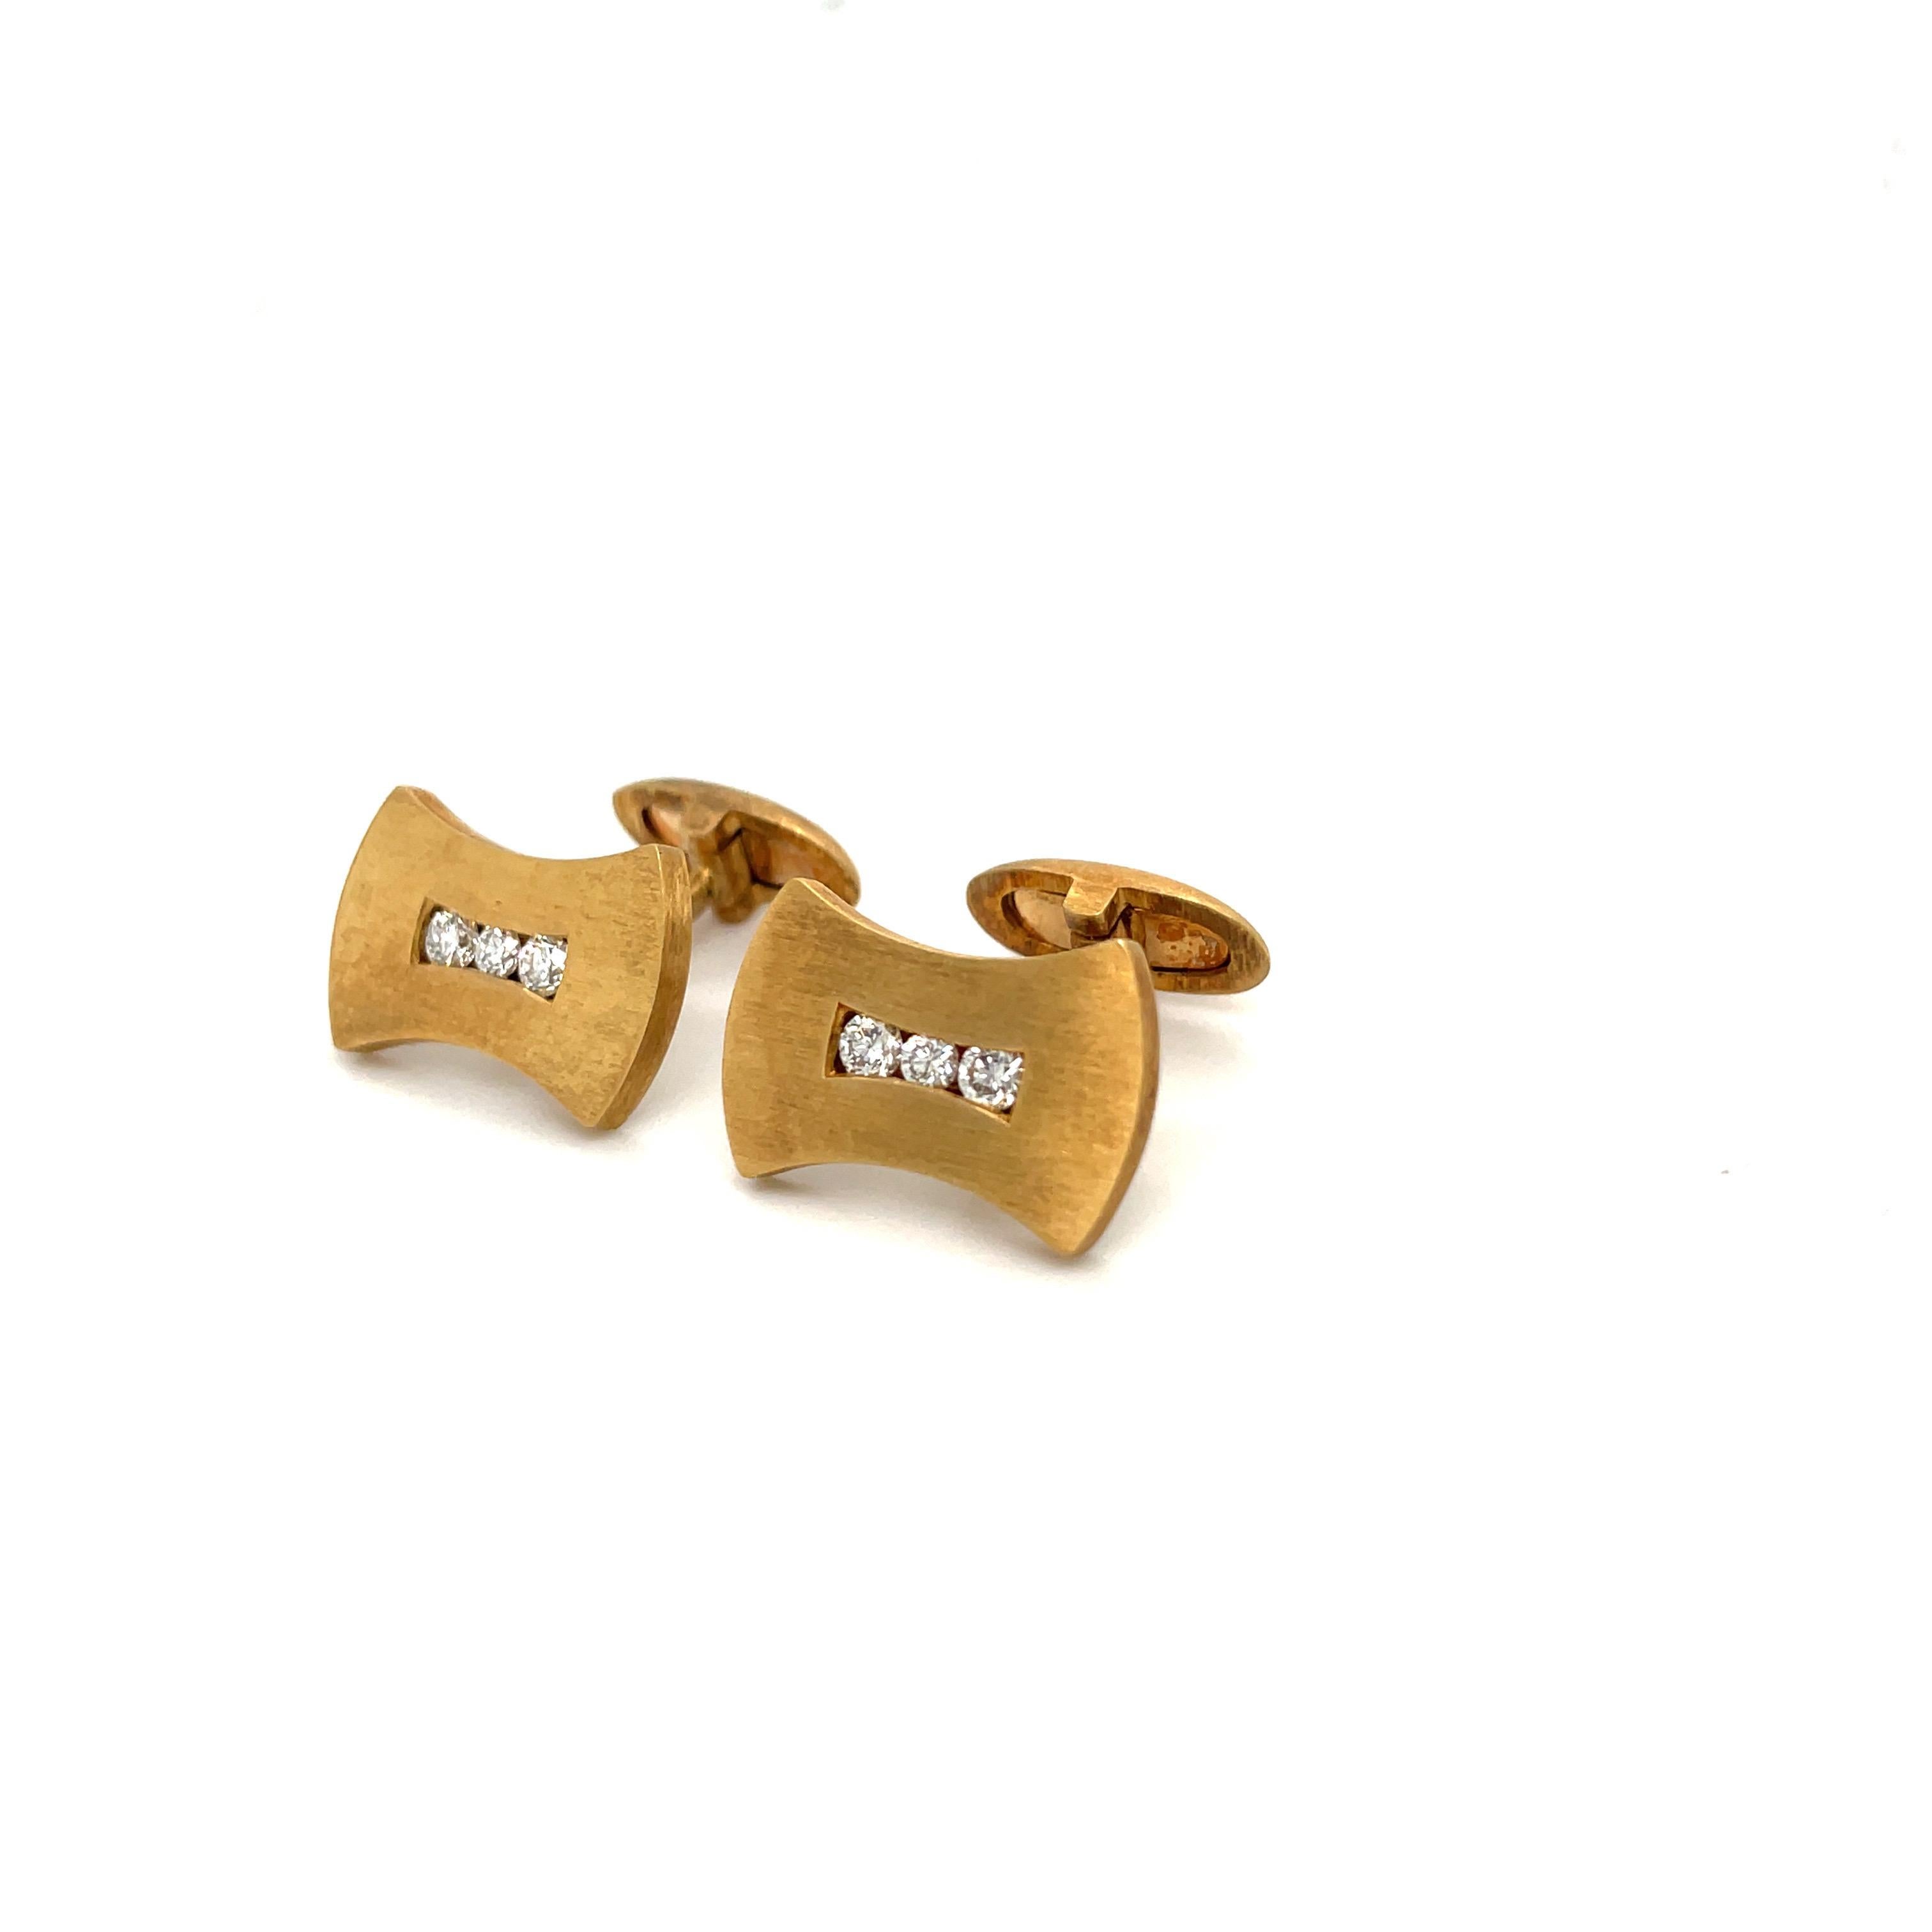 Elegant and festive 18 karat yellow gold cuff links. The bow tie shaped cuff links are designed in a matte finish and are set with round brilliant diamonds, total weight 0.55 carats. The bar back cuff links measure 3/4